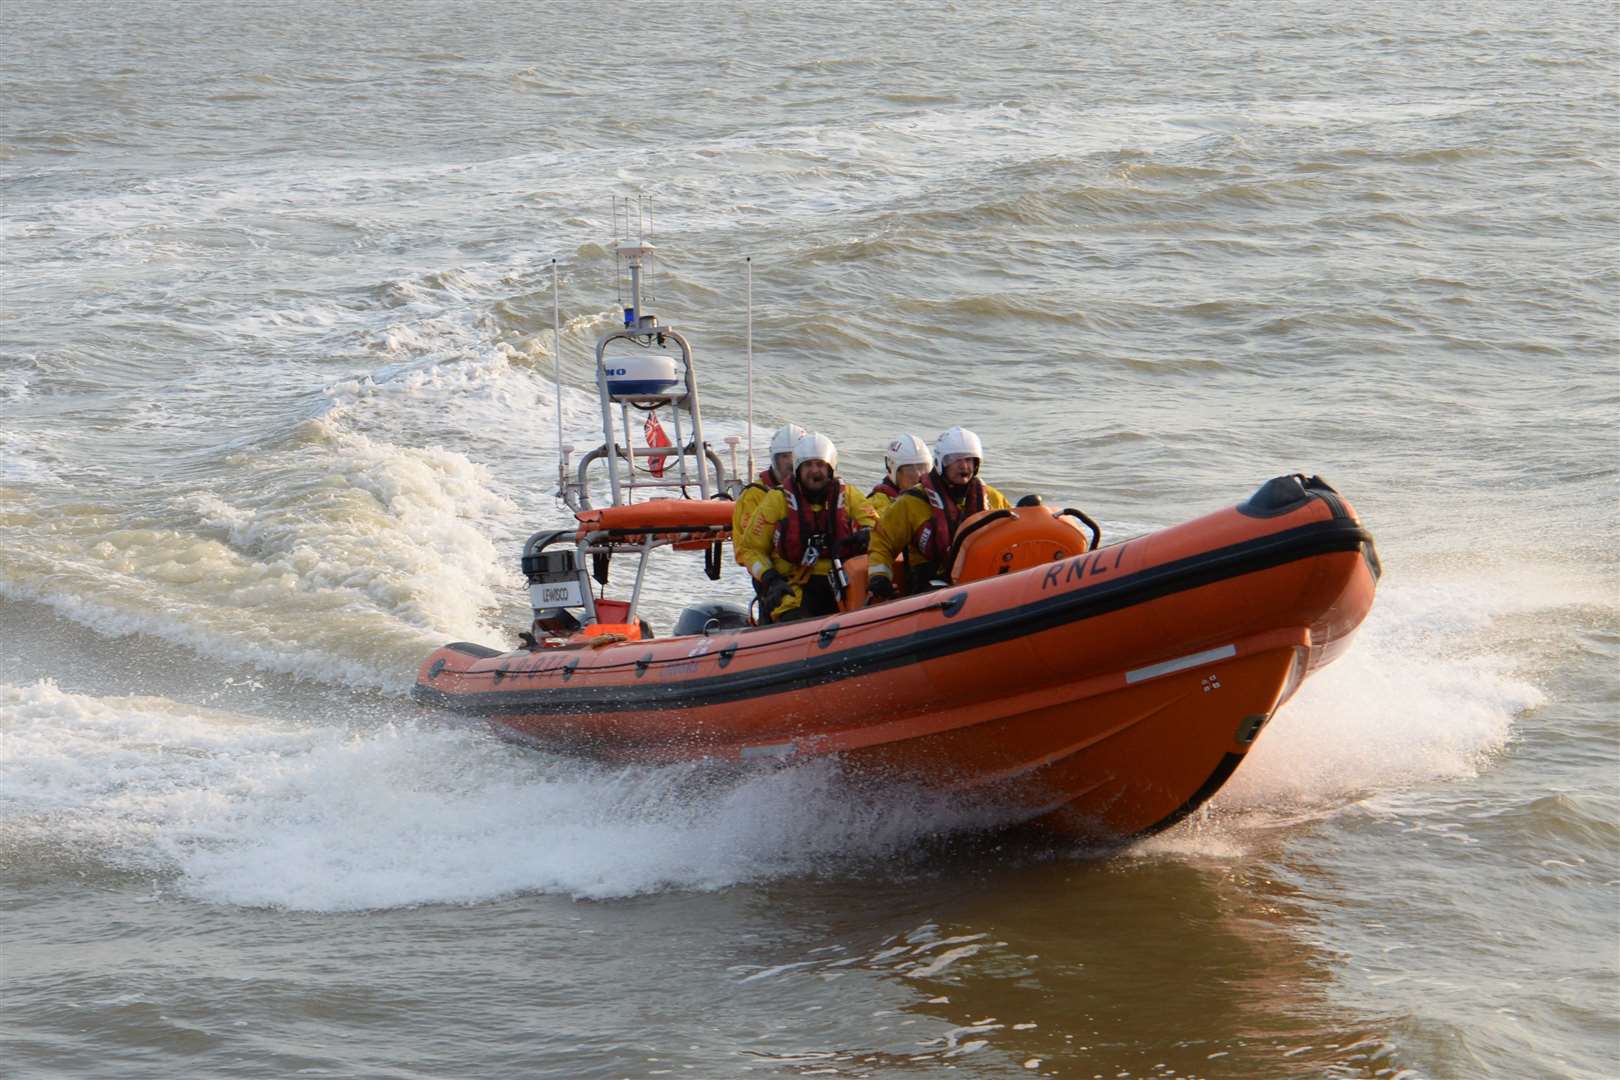 Whitstable RLNI crews were called out to two separate incidents involving inflatable beach toys yesterday Photo: RNLI